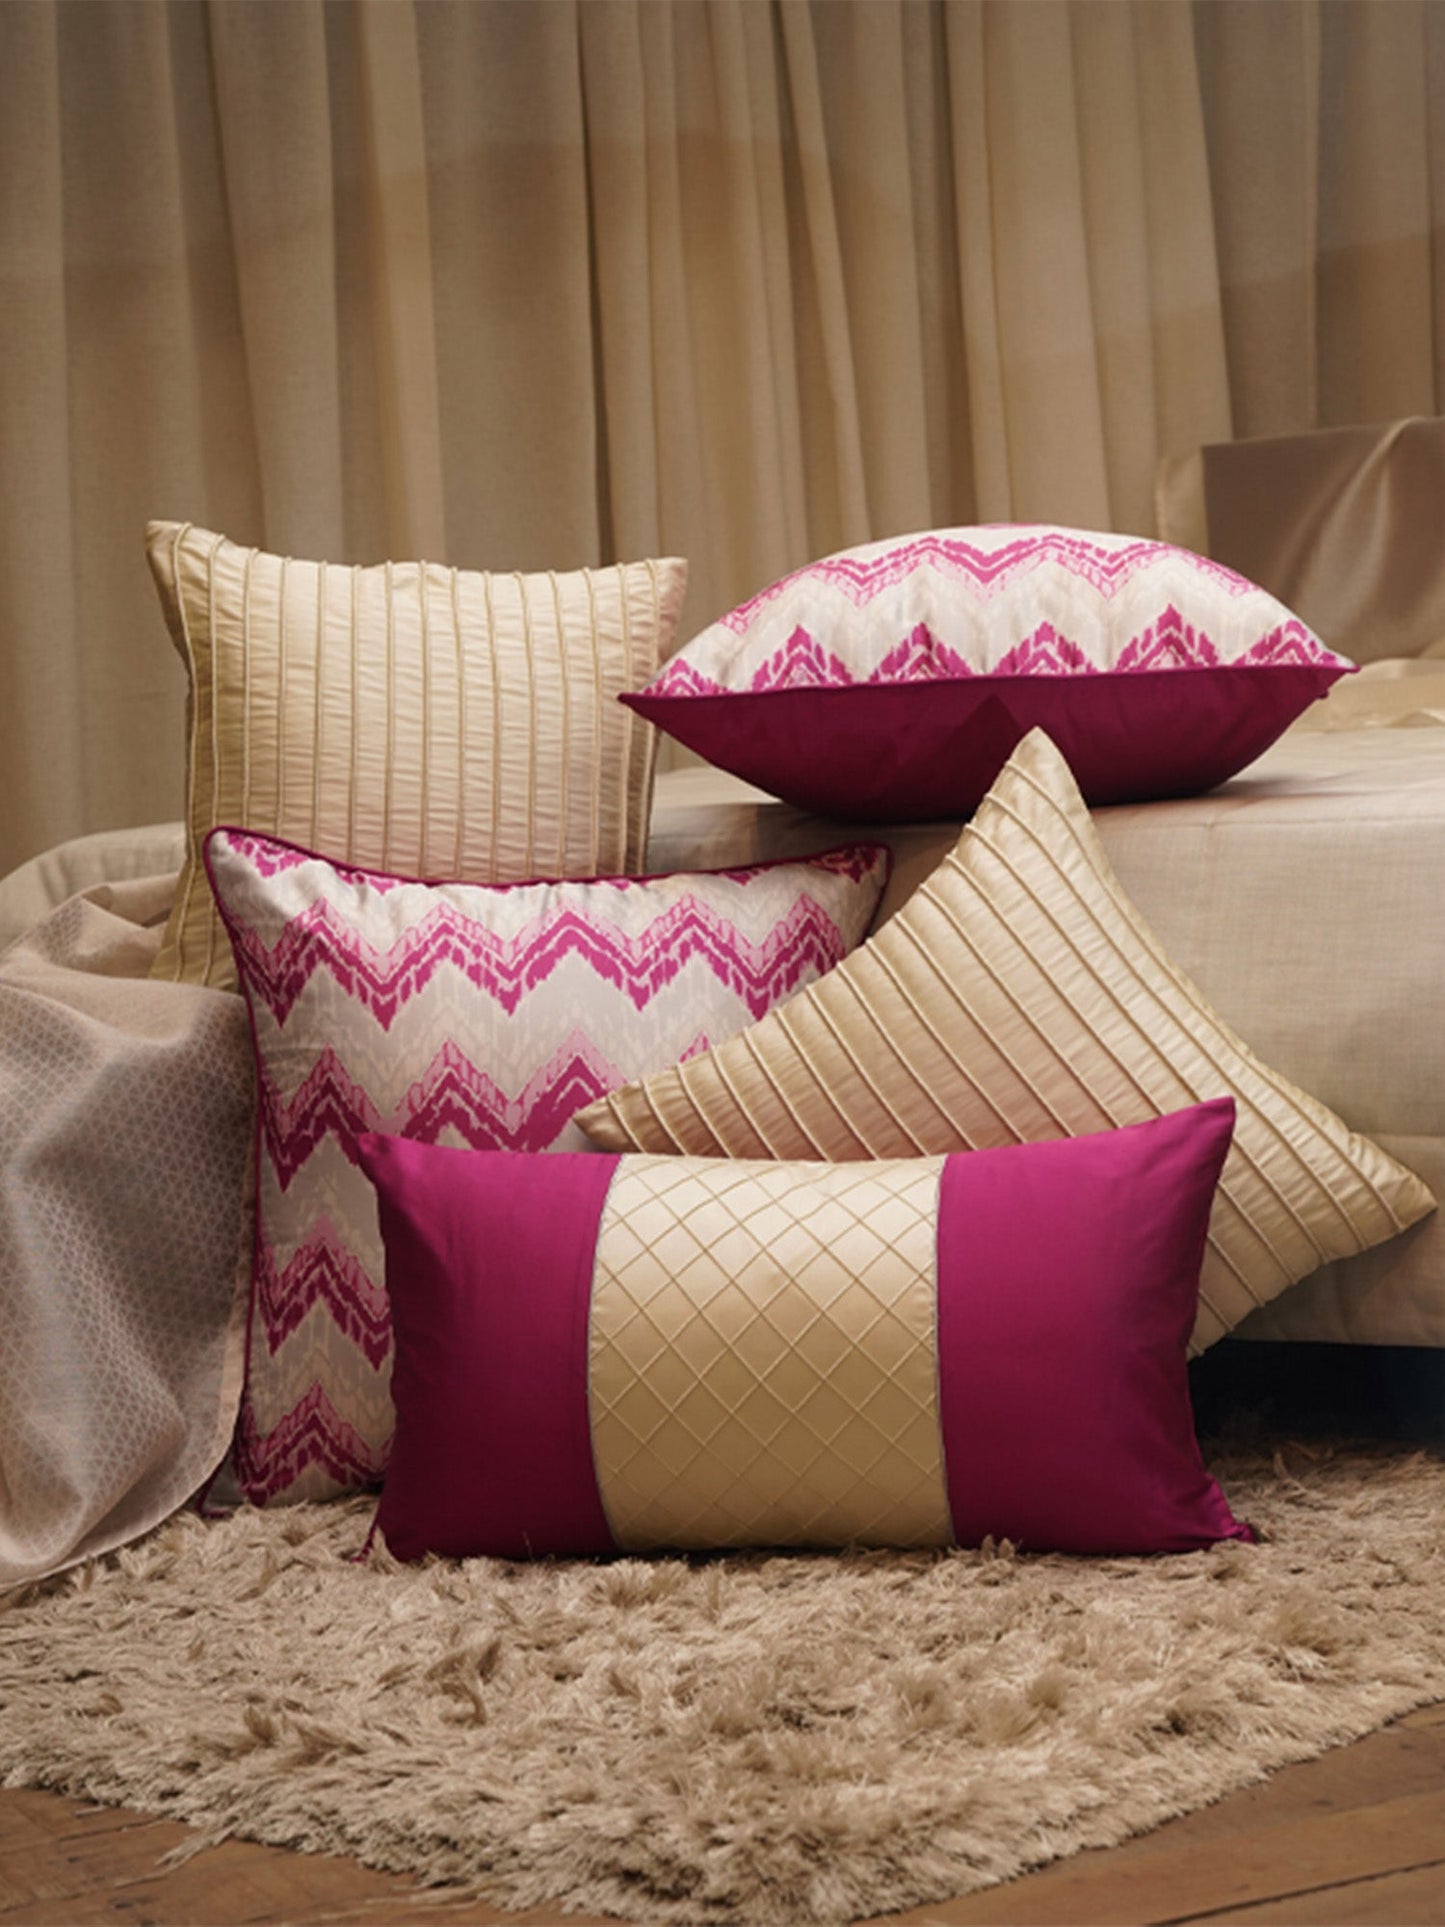 Co-ordinated Cushion Cover Set of 5 Polyester Off-White and Pink  - 20" X 20", 16" X 16", 12" X 22"